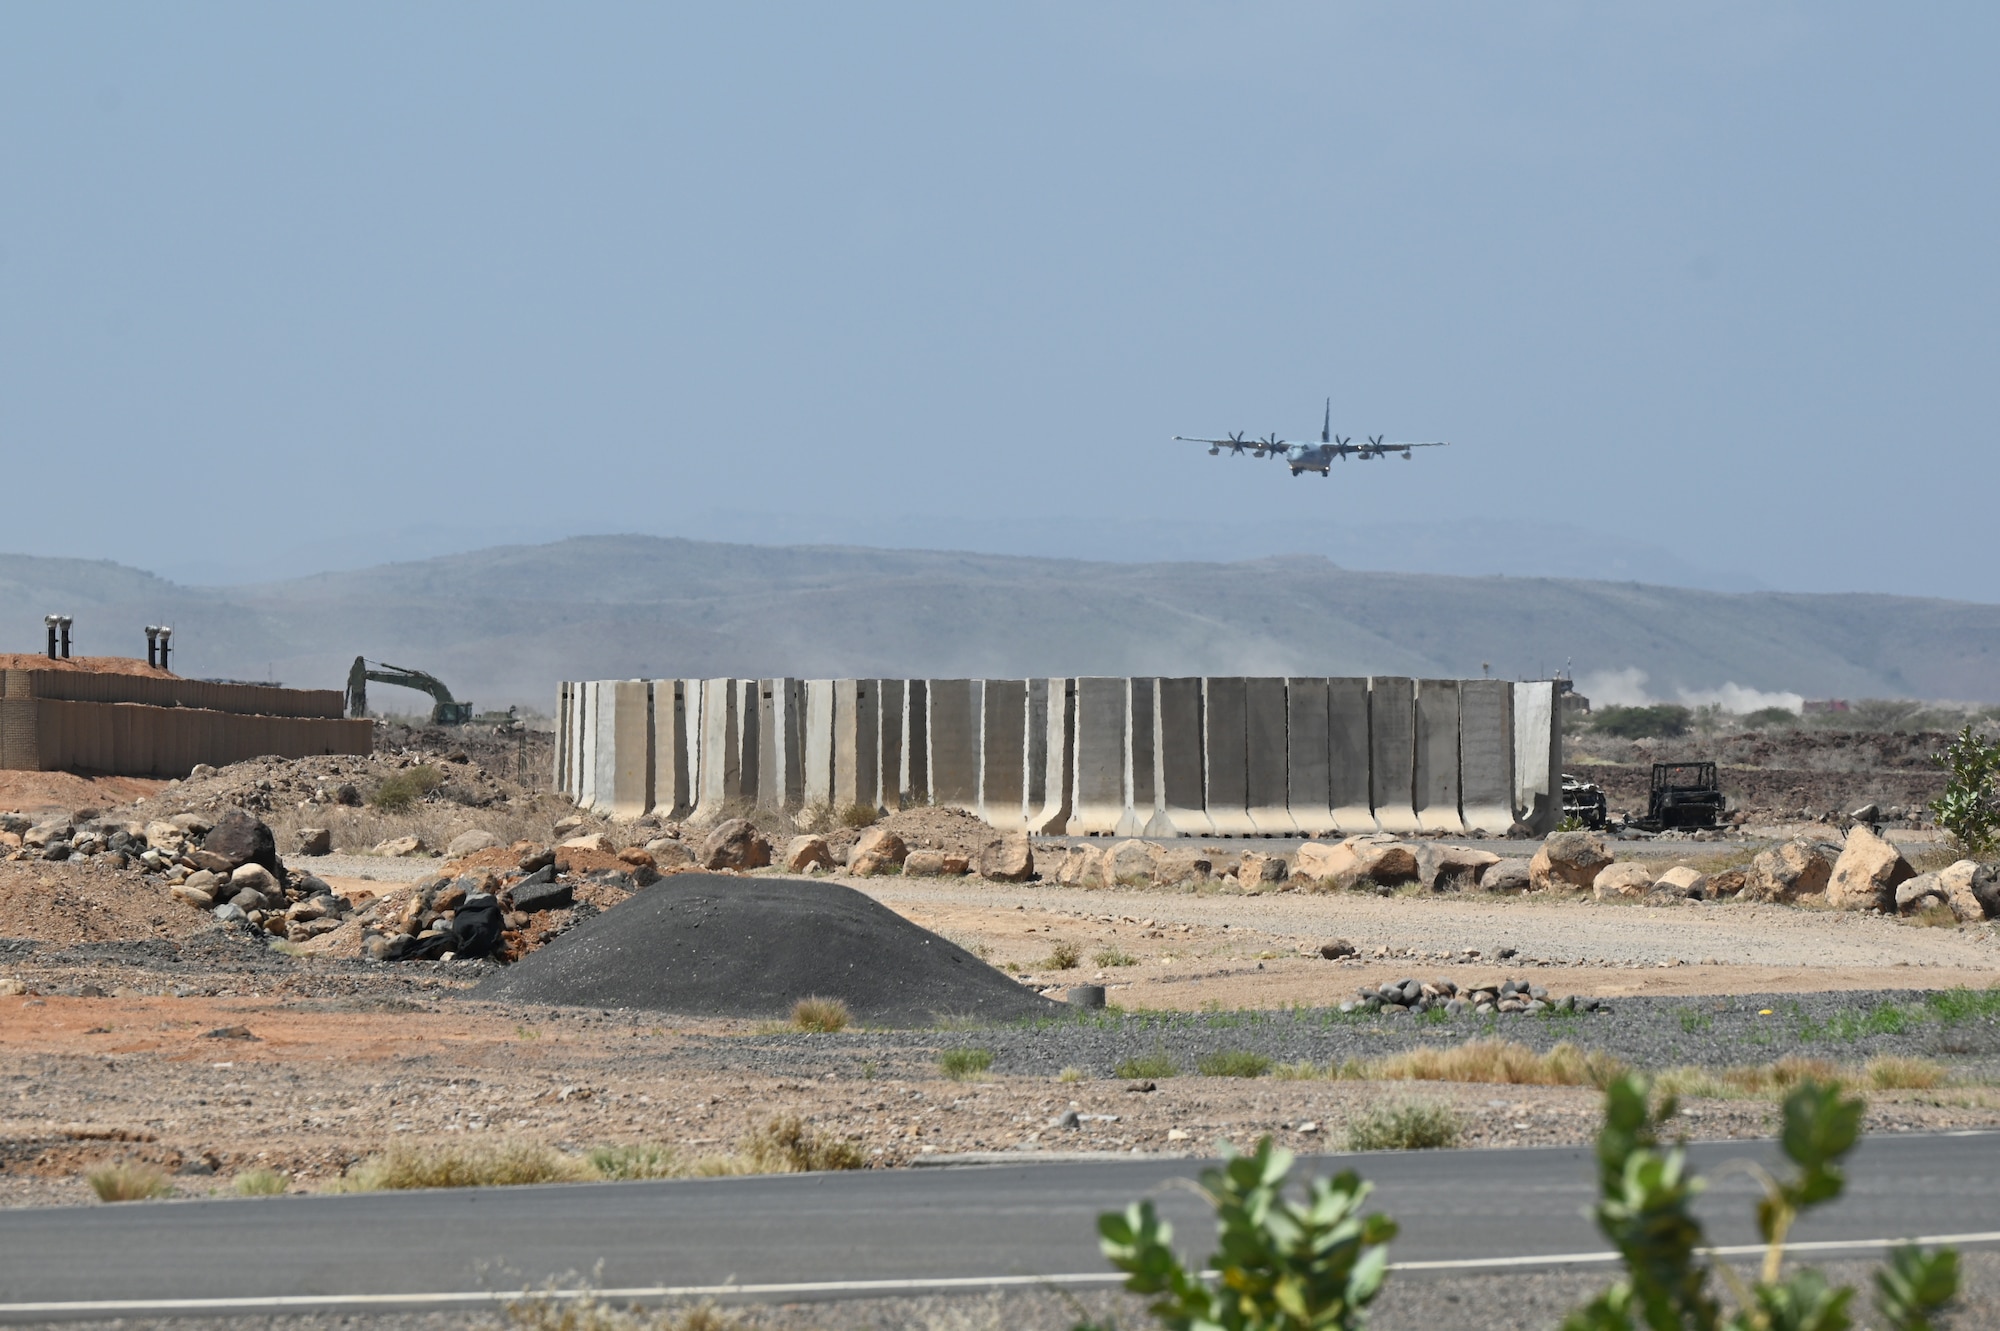 A U.S. Marine Corps KC-130J lands at the refueling site in support of a simulated Forward Arming and Refueling Point (FARP) exercise at Chabelley Airfield, Djibouti, Feb. 22, 2023. The ability of a Joint Force Commander to move their forces fluidly across the theater to seize, retain and utilize initiatives against an adversary is key to ensuring readiness and resilience, and protecting assets and personnel. (U.S. Air Force photo by Tech. Sgt. Jayson Burns)